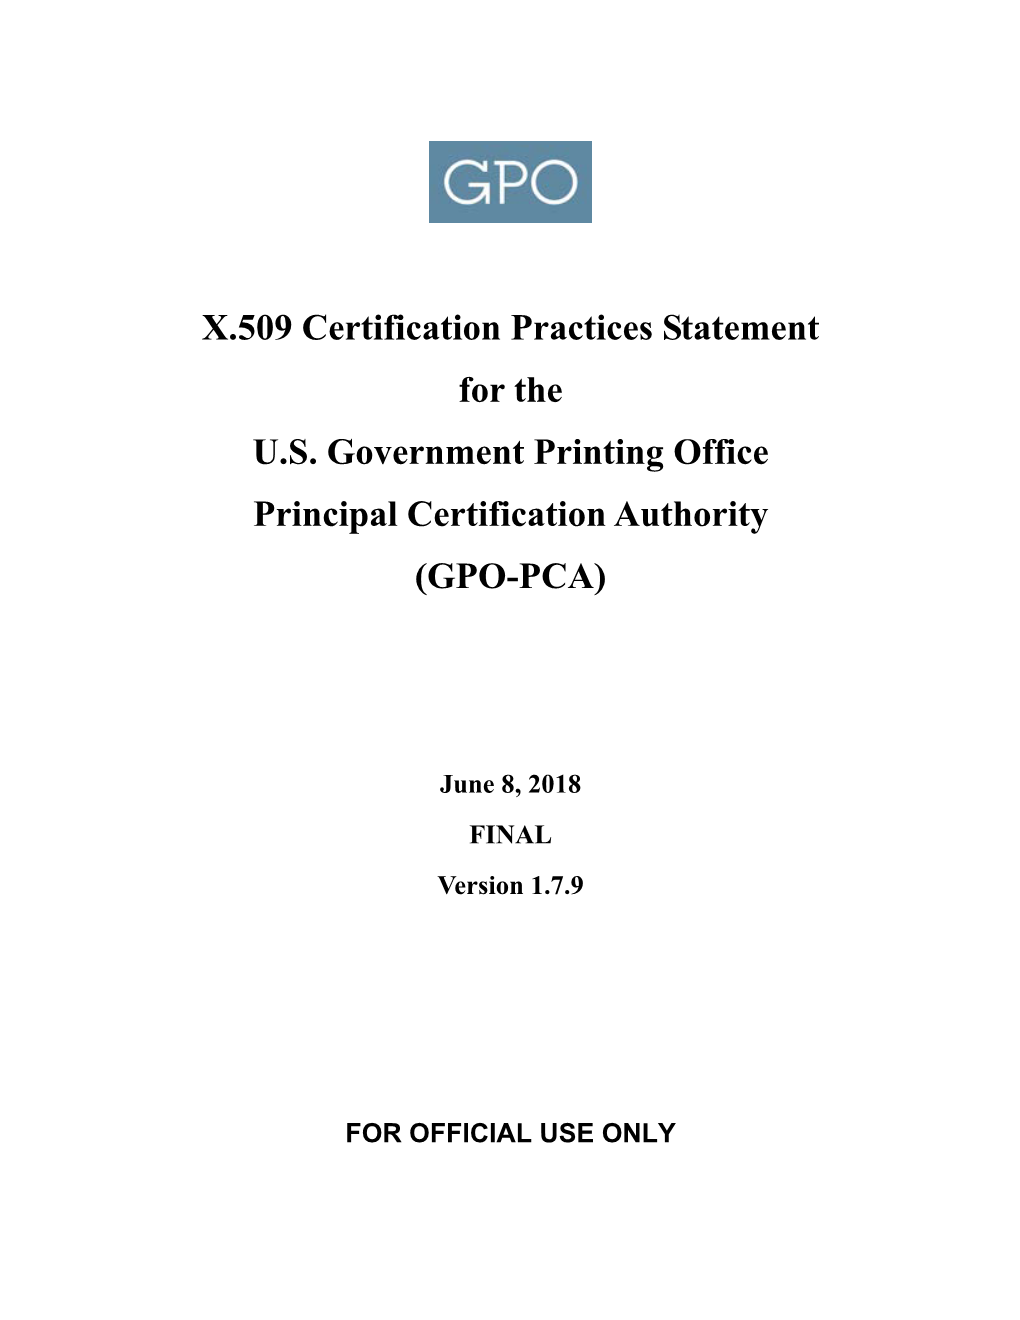 X.509 Certification Practices Statement for the U.S. Government Printing Office Principal Certification Authority (GPO-PCA)